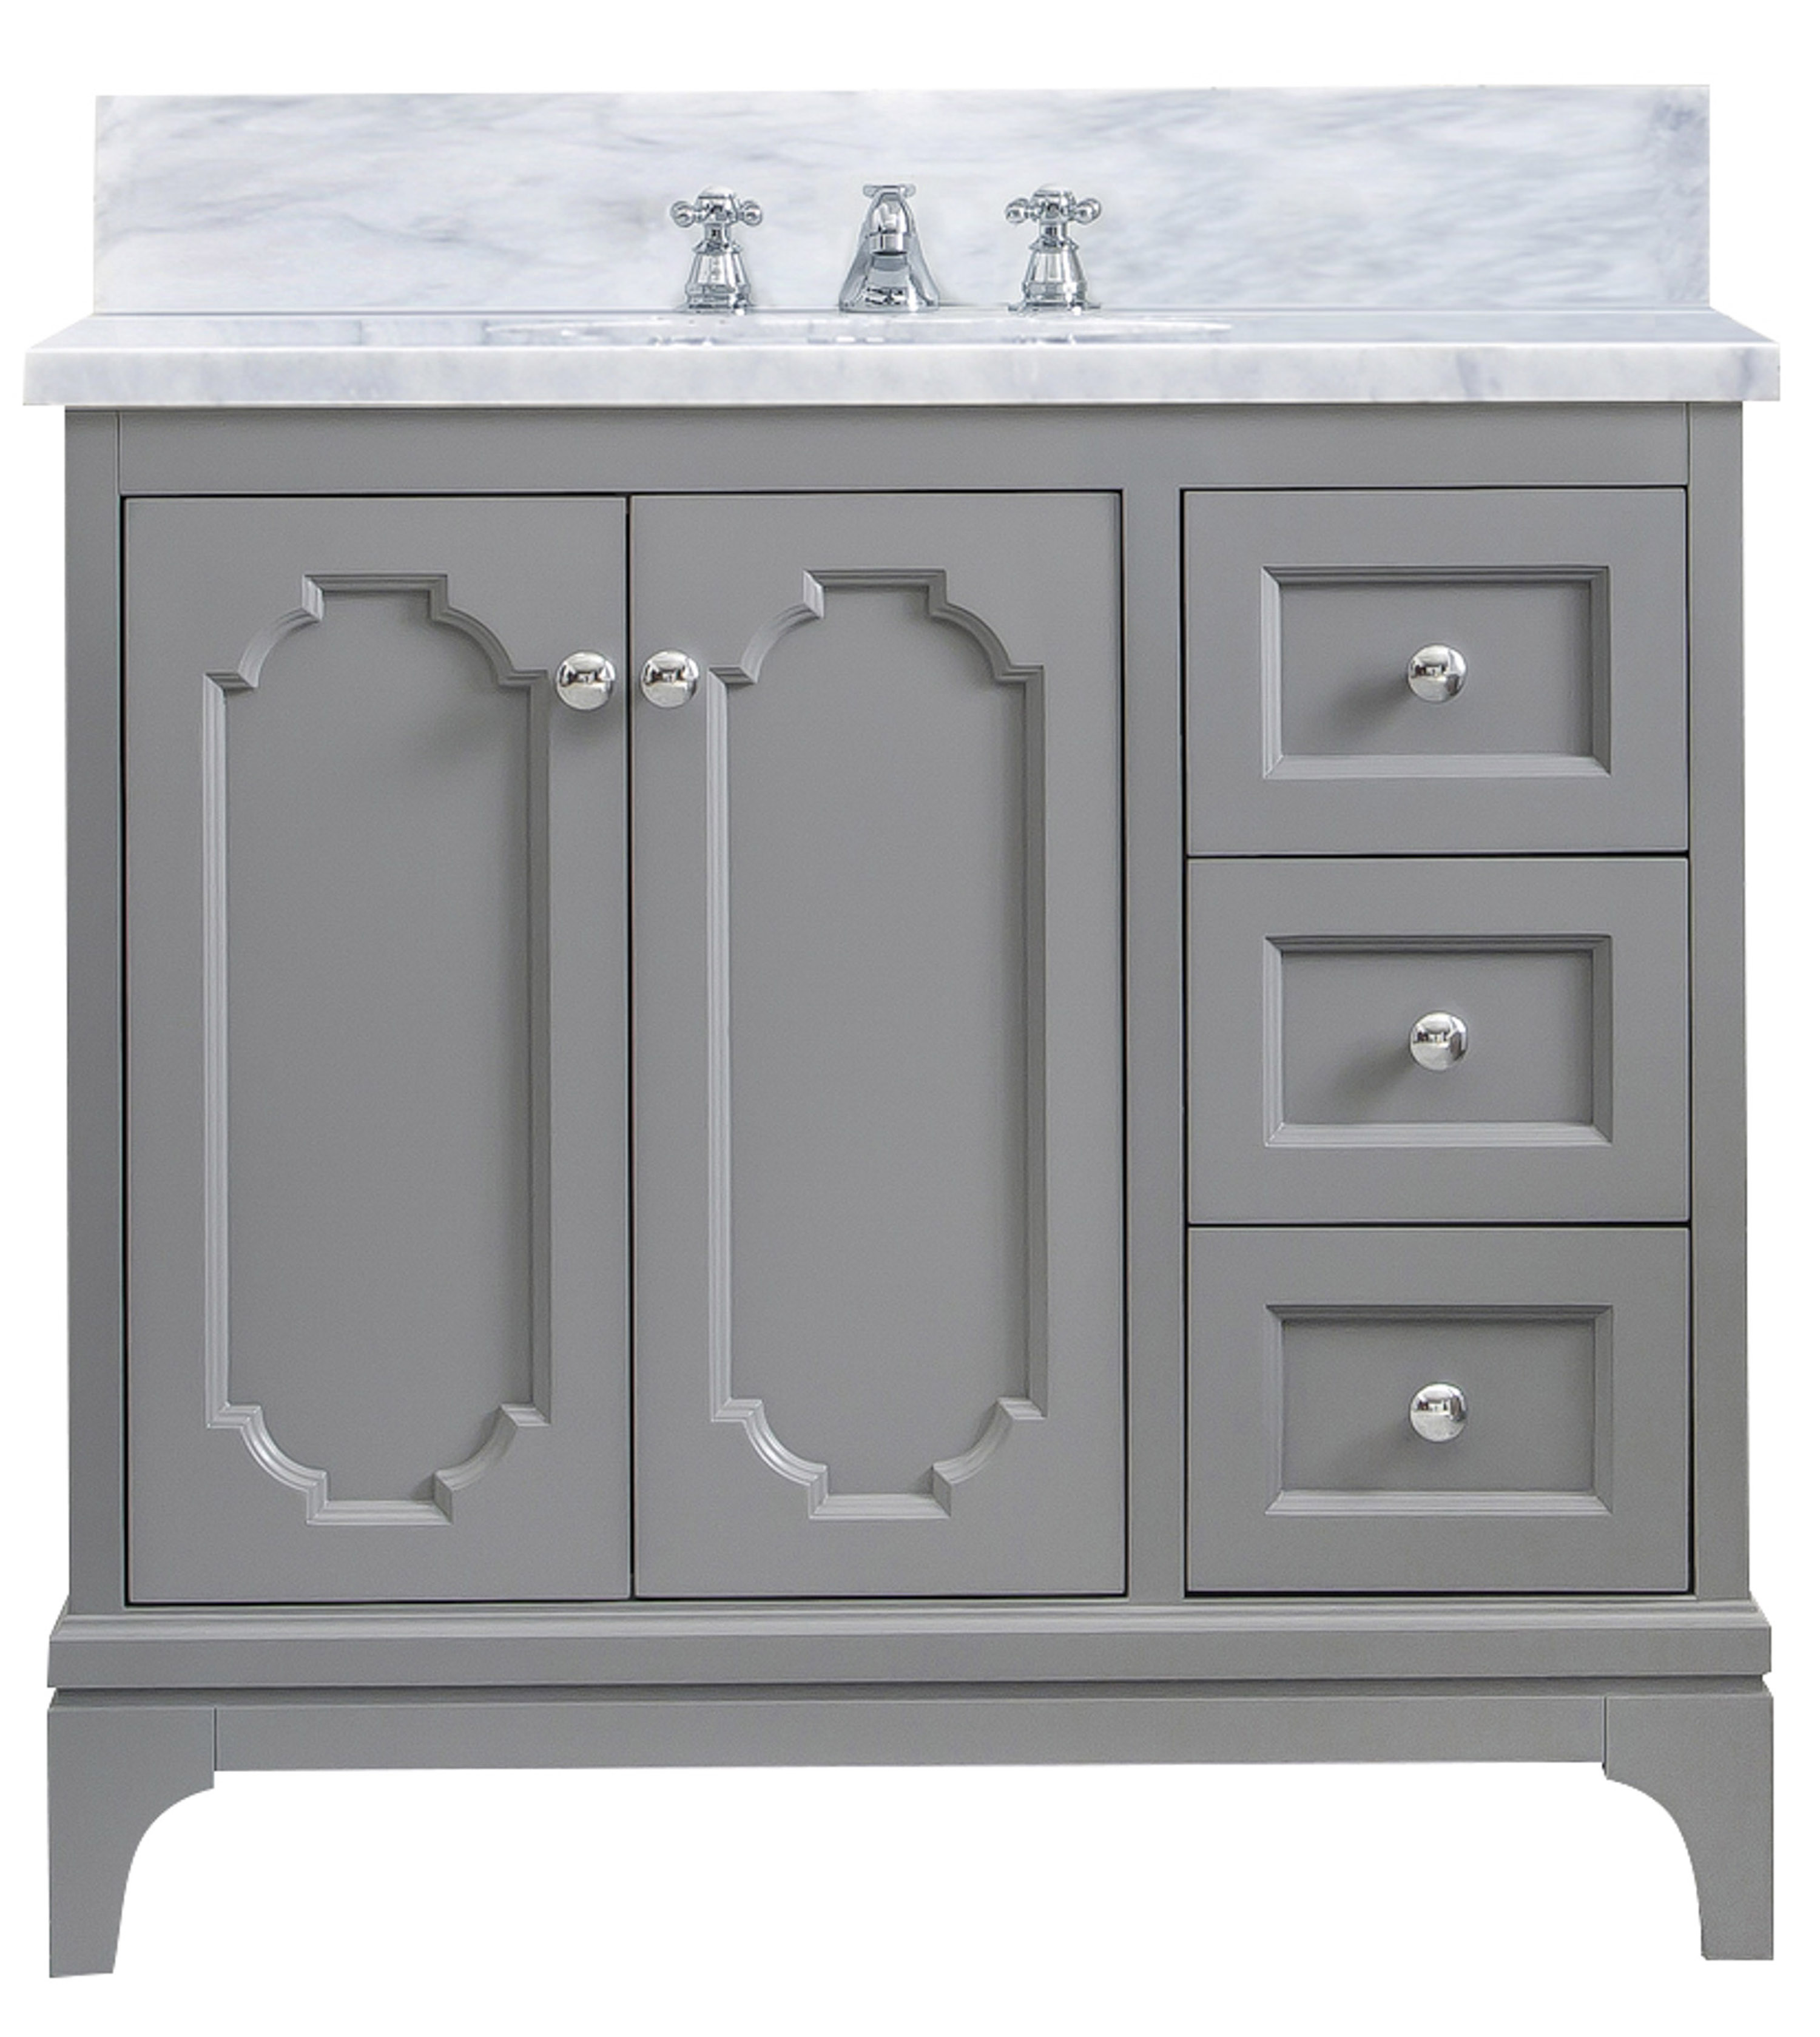 36" Single Sink Carrara White Marble Countertop Vanity in Cashmere Grey with Mirror and Faucet Options